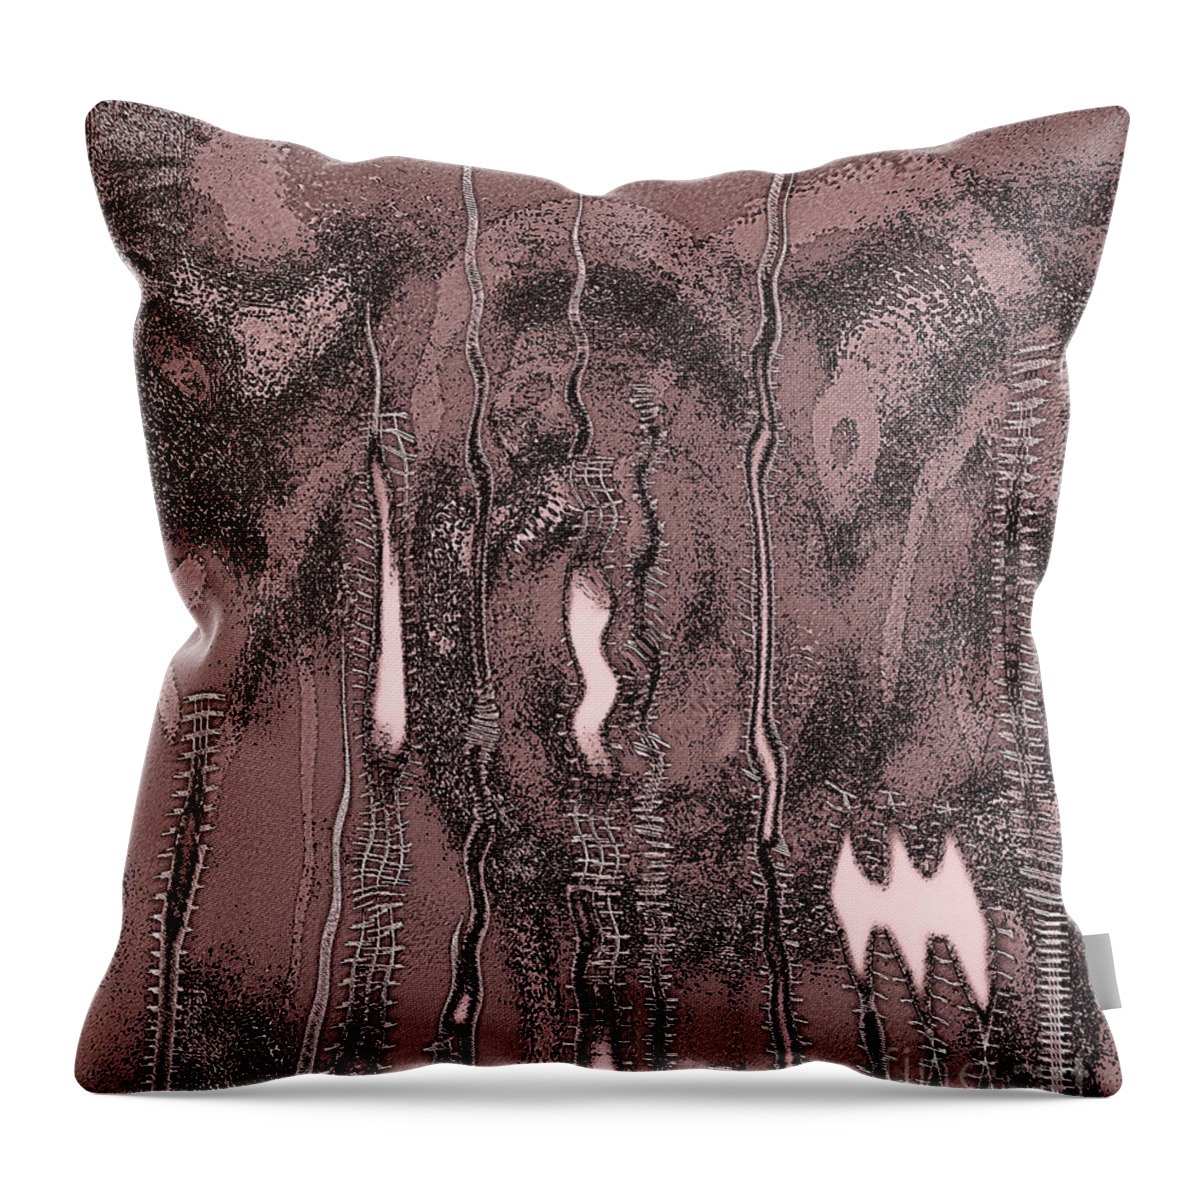 City Throw Pillow featuring the digital art Towers of Dystopia by Alexandra Vusir